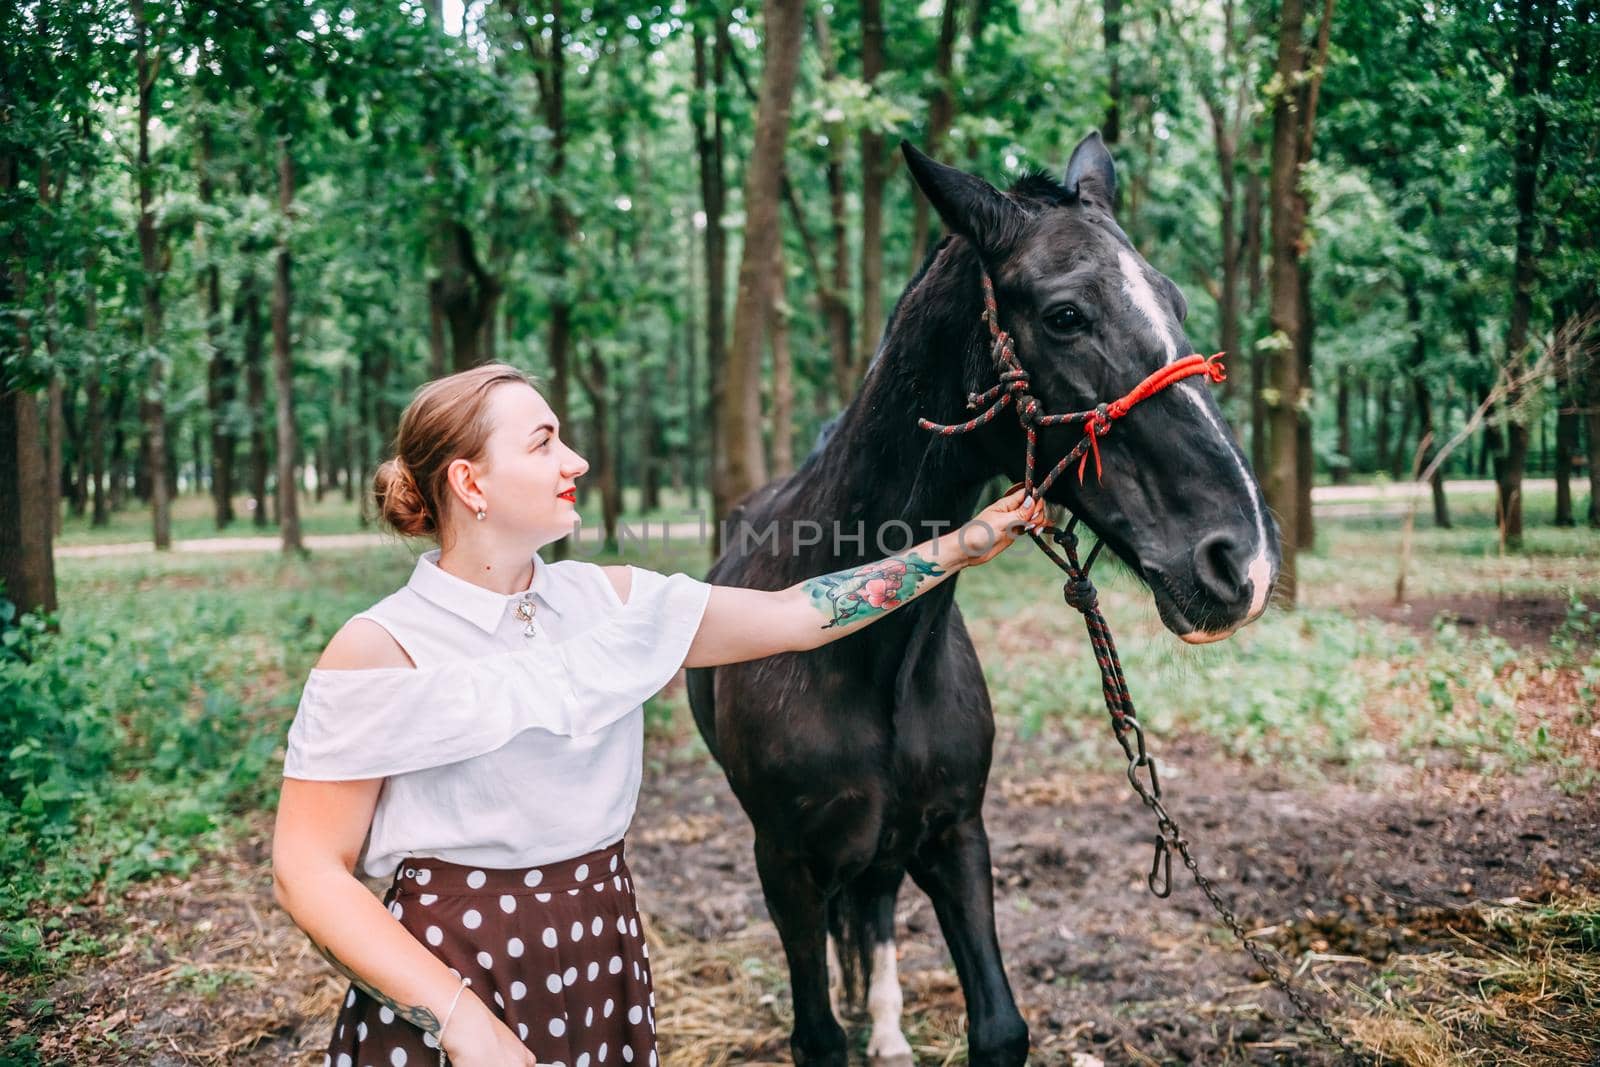 photo of a young smiling blonde, in a white blouse and skirt, with a horse, in a summer forest by mosfet_ua